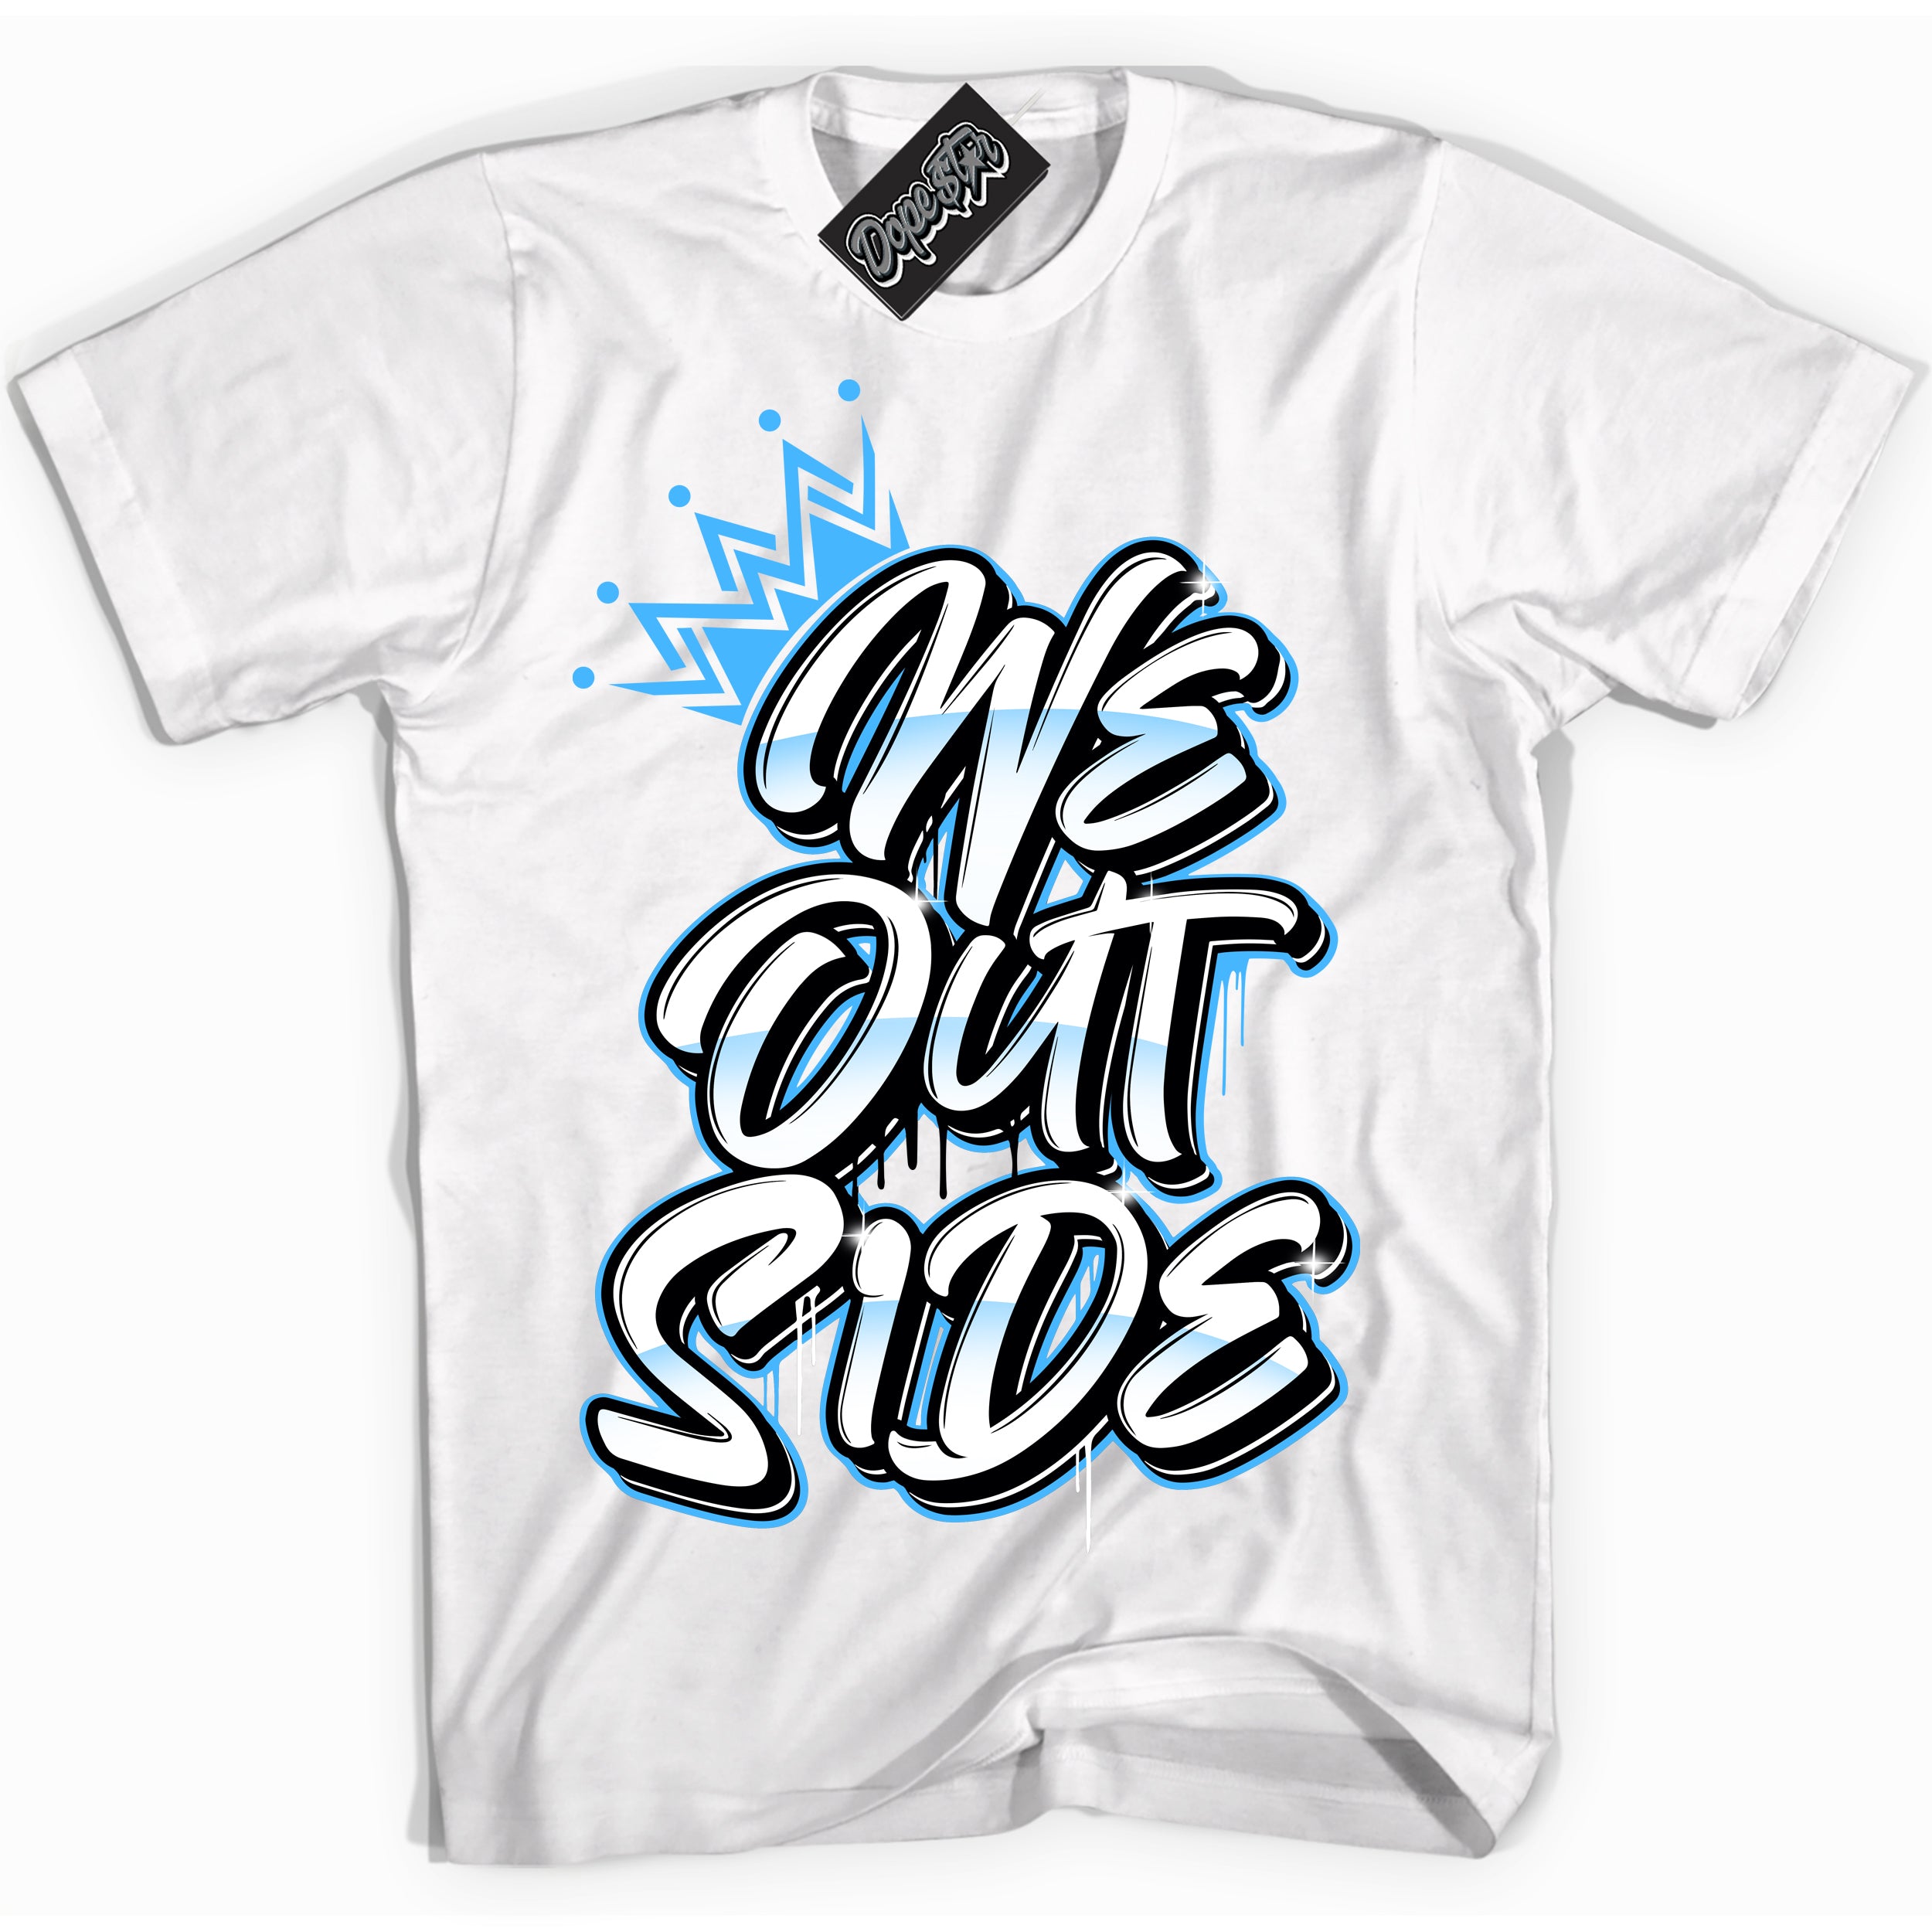 Cool White graphic tee with “ We Outside ” design, that perfectly matches Powder Blue 9s sneakers 